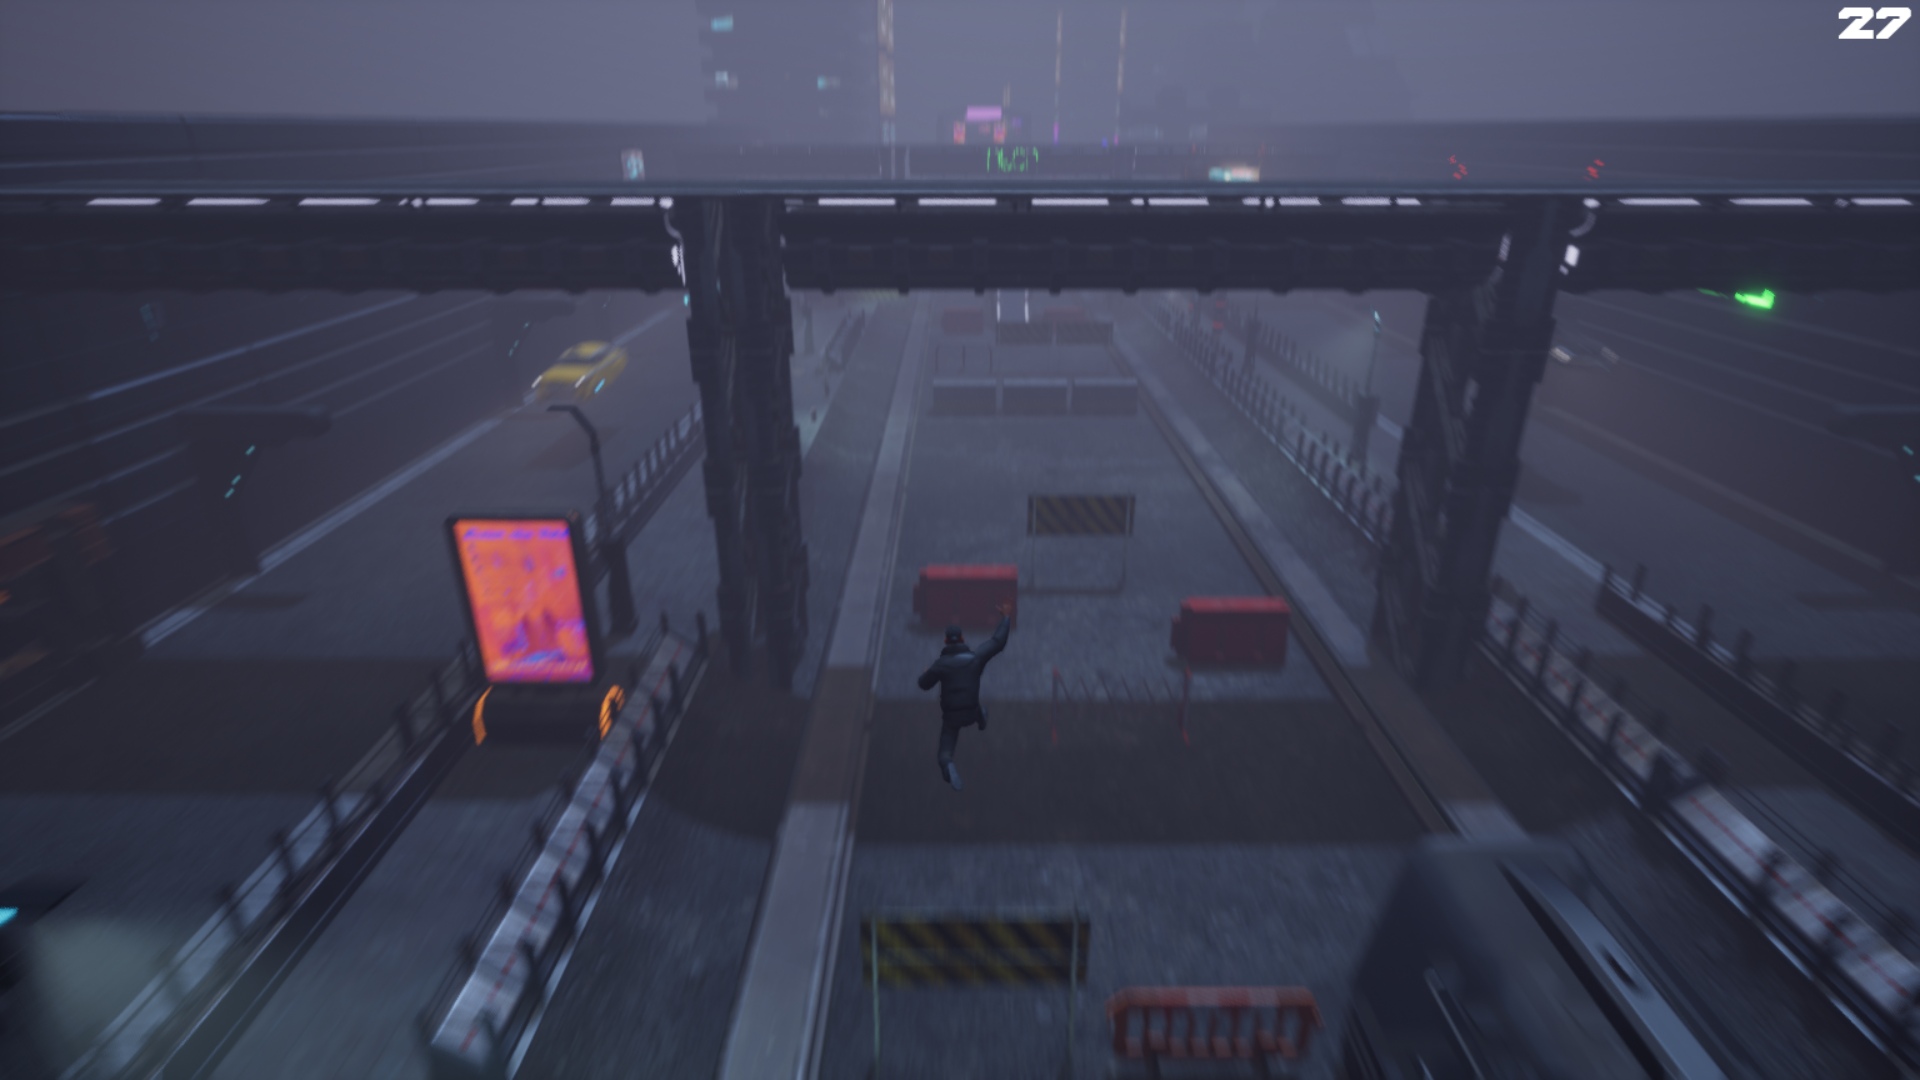 Creating a PC Version of Subway Surfers in UE4